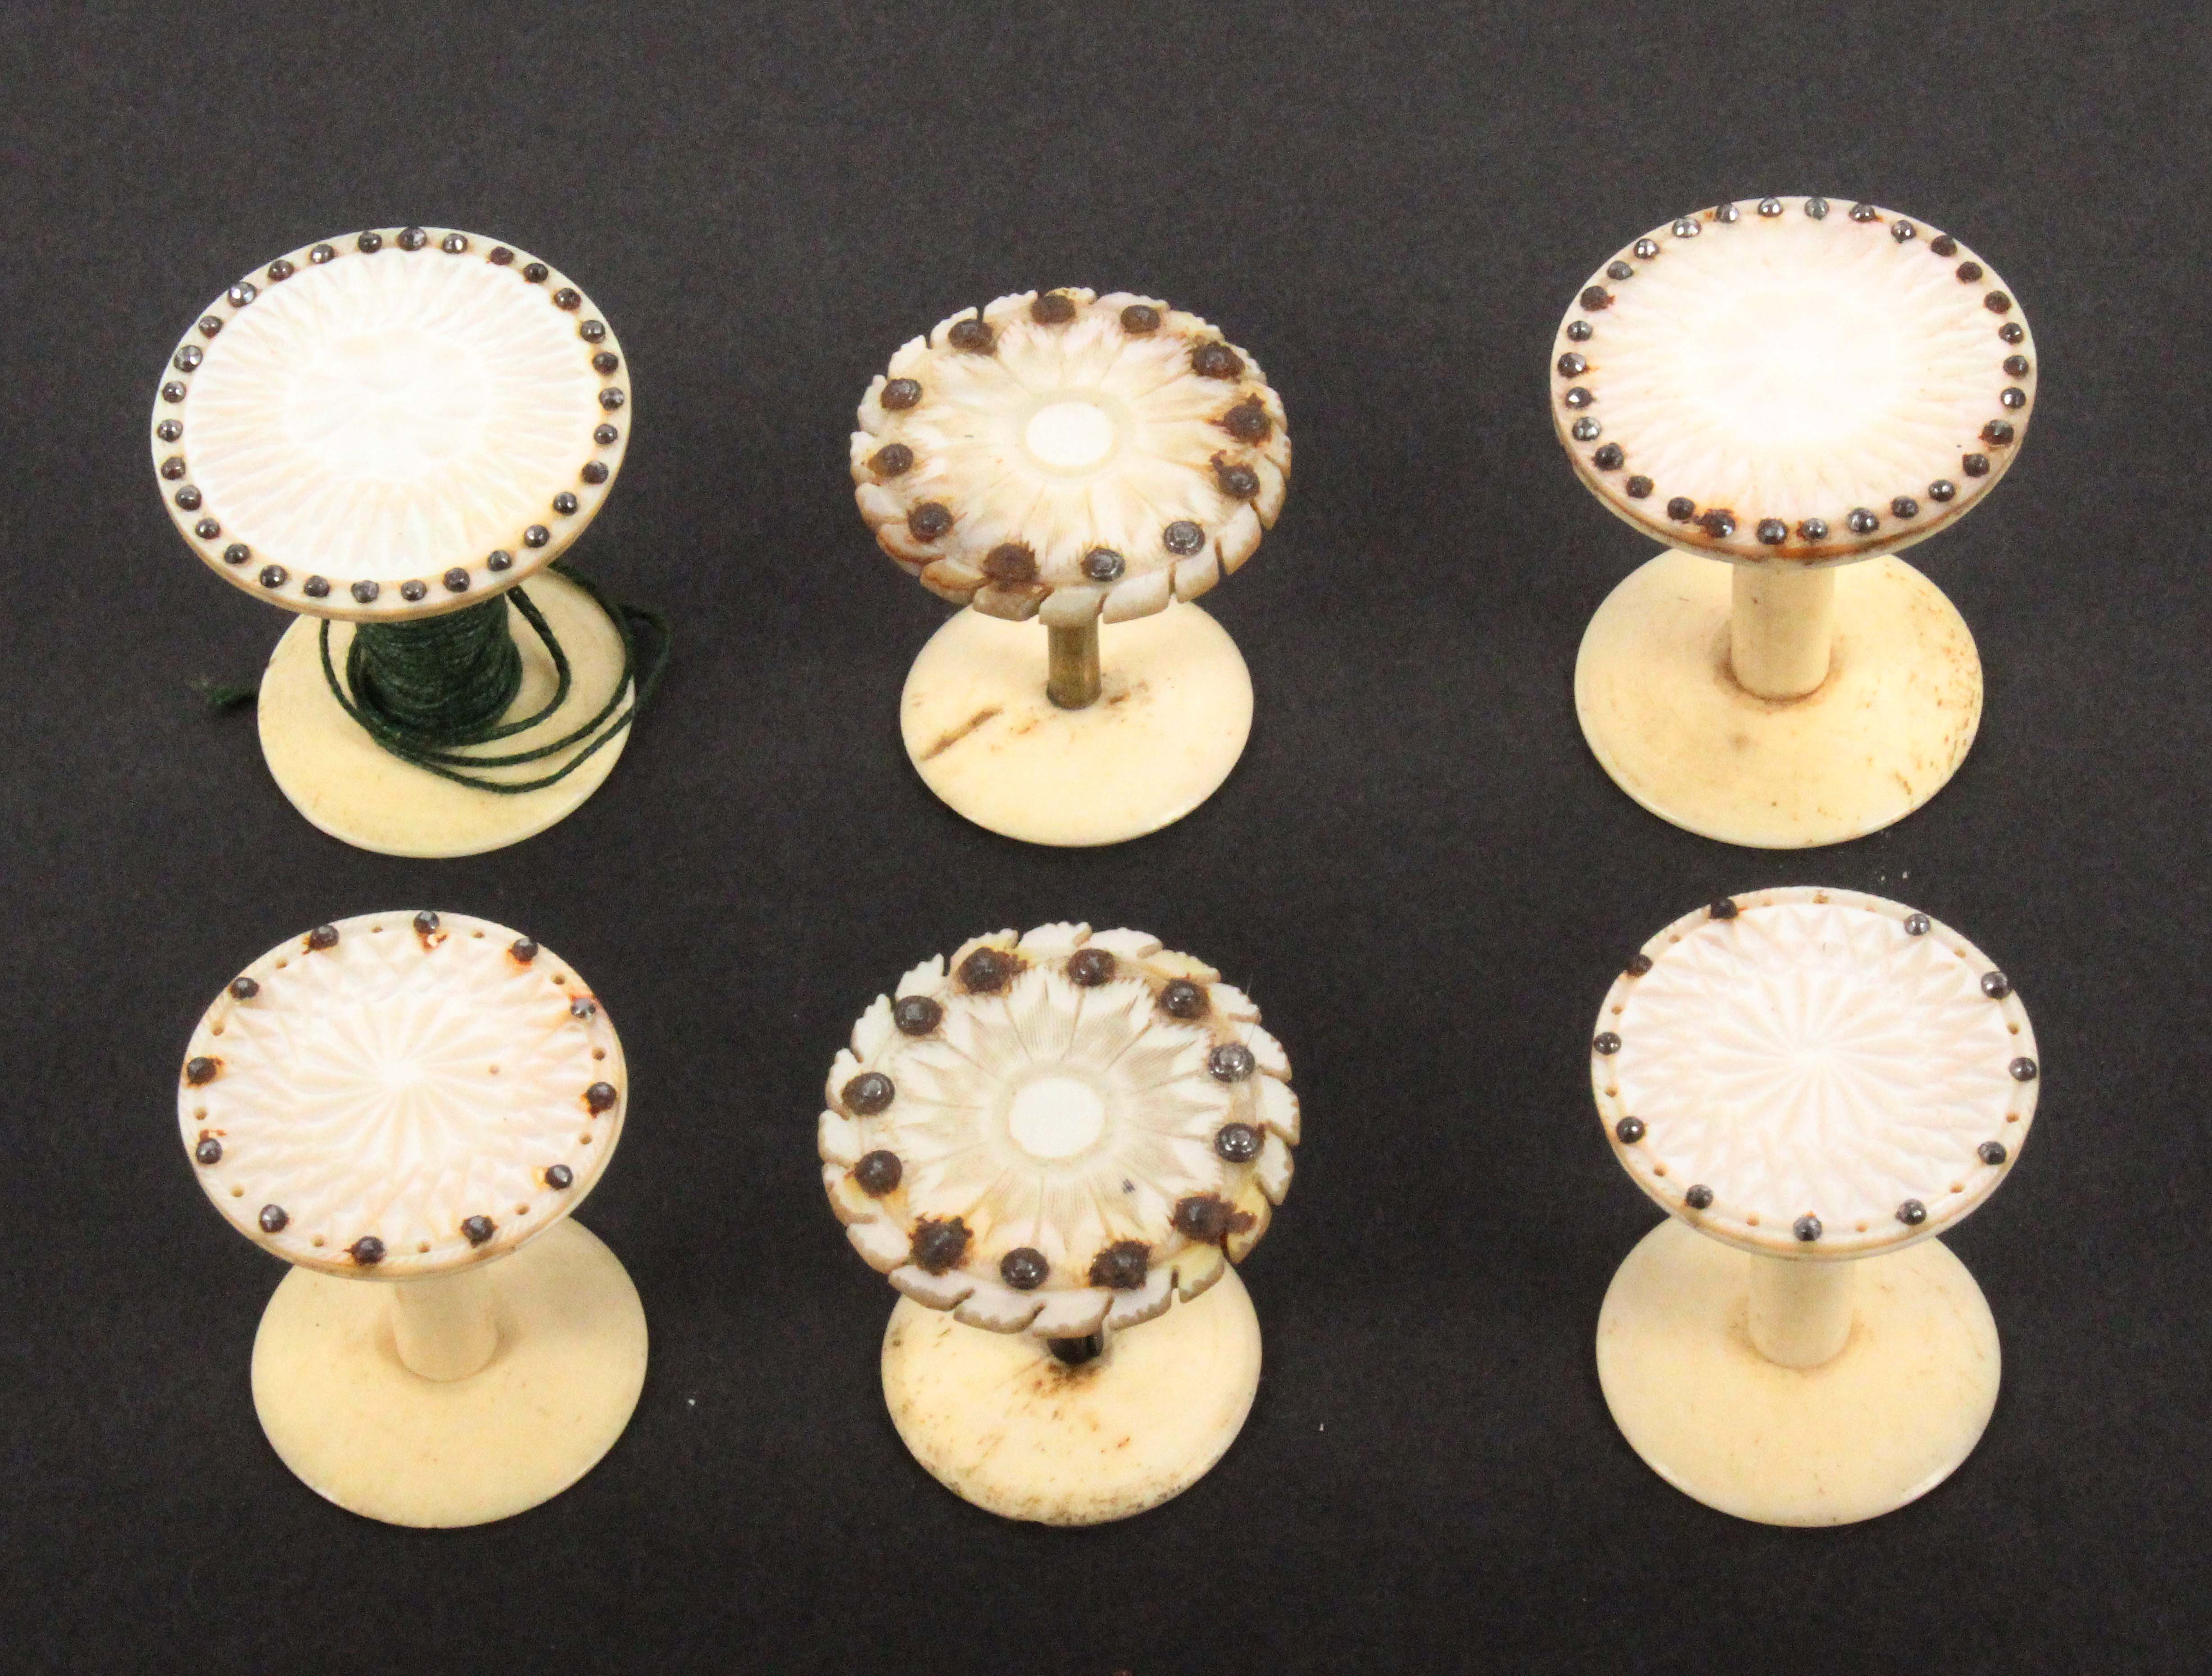 Three pairs of mother of pearl top reels, each pair with cut decoration and embellished with cut